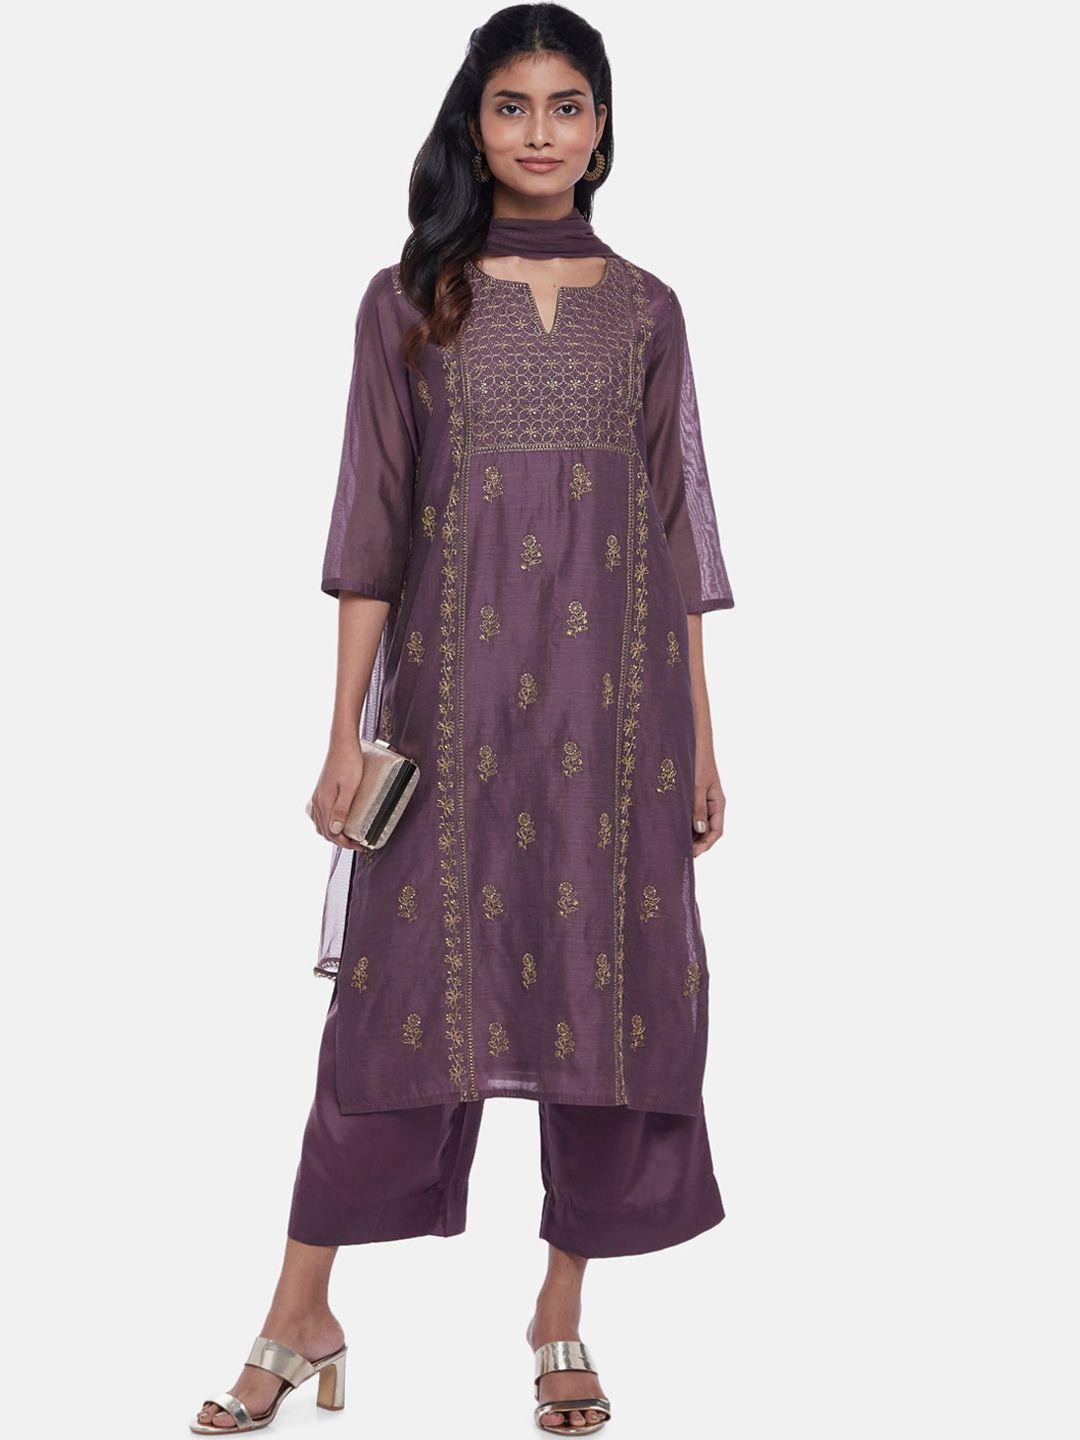 rangmanch by pantaloons women floral embroidered thread work  kurta with palazzos & with